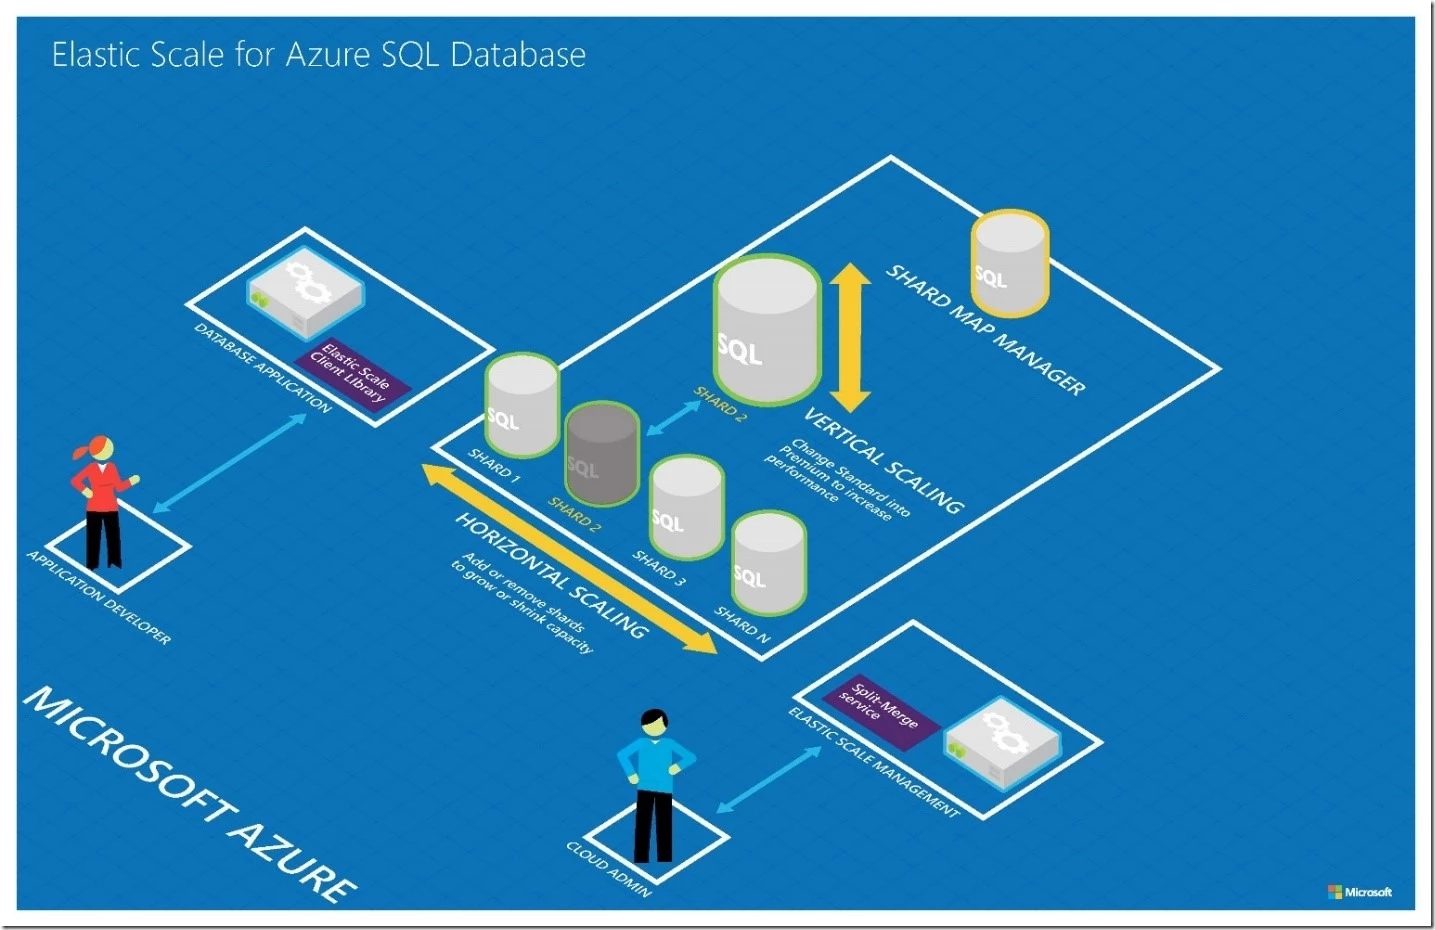 Microsoft Azure for Elastic Computing and Scalability